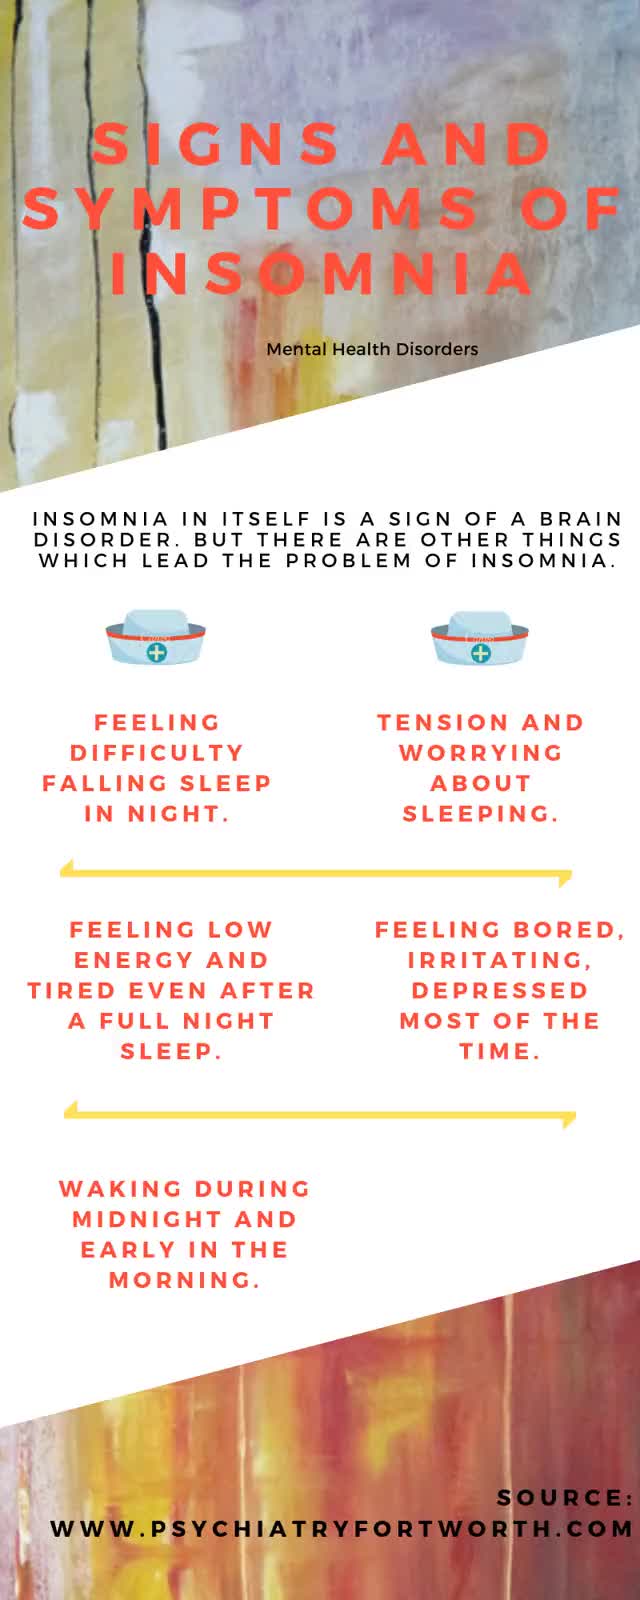 Signs and Symptoms of insomnia